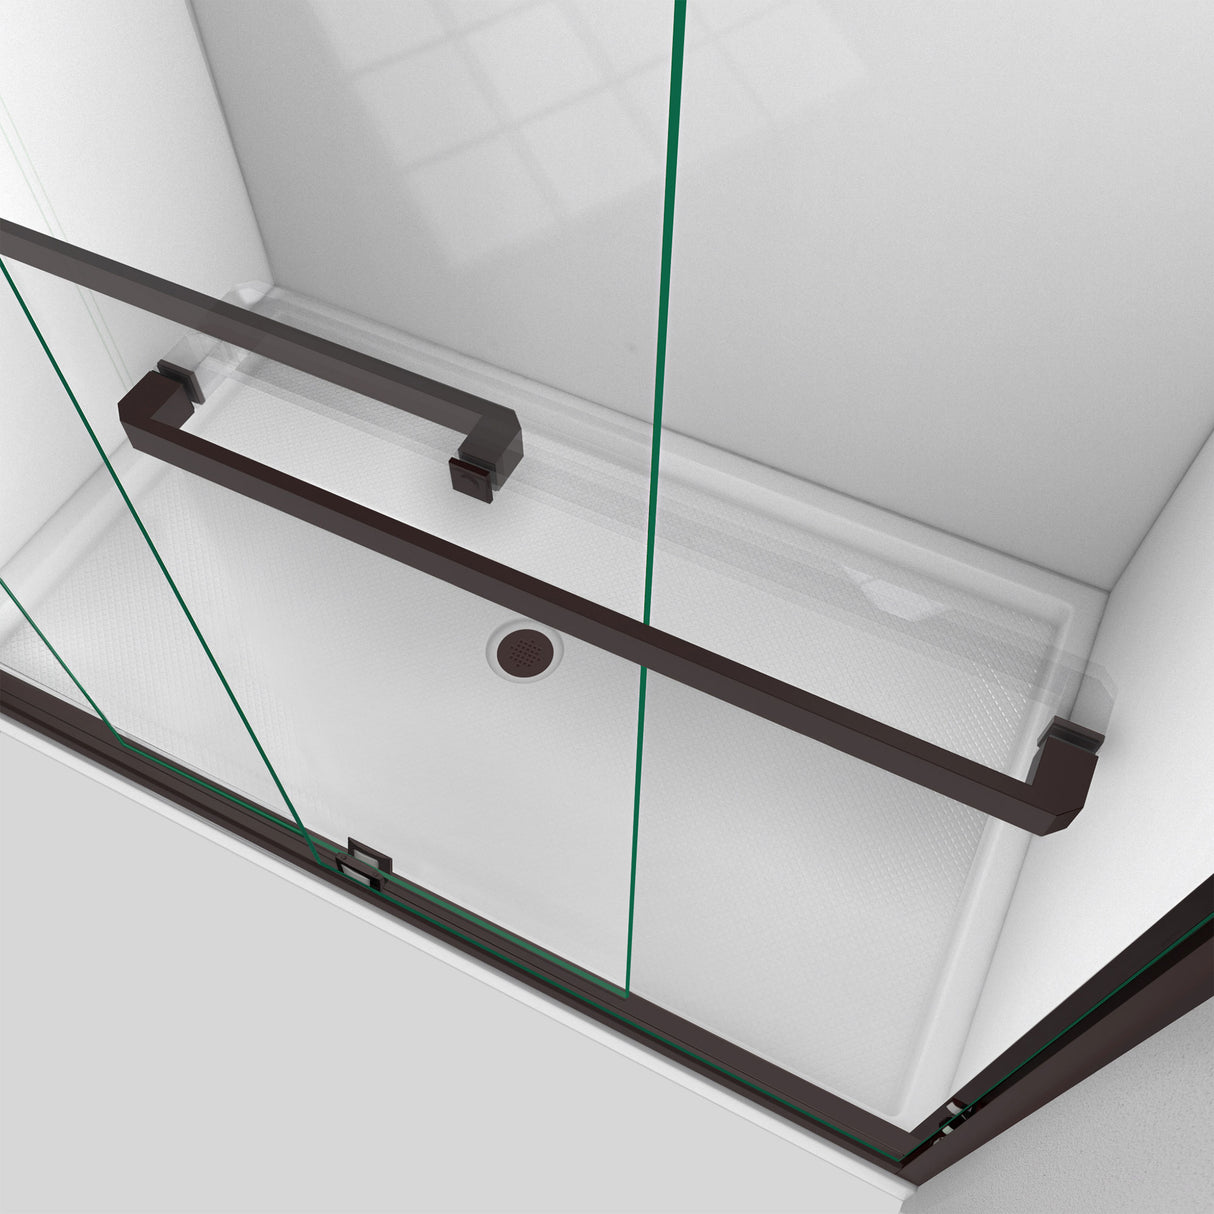 DreamLine Encore 36 in. D x 60 in. W x 78 3/4 in. H Bypass Shower Door in Oil Rubbed Bronze and Left Drain Biscuit Base Kit